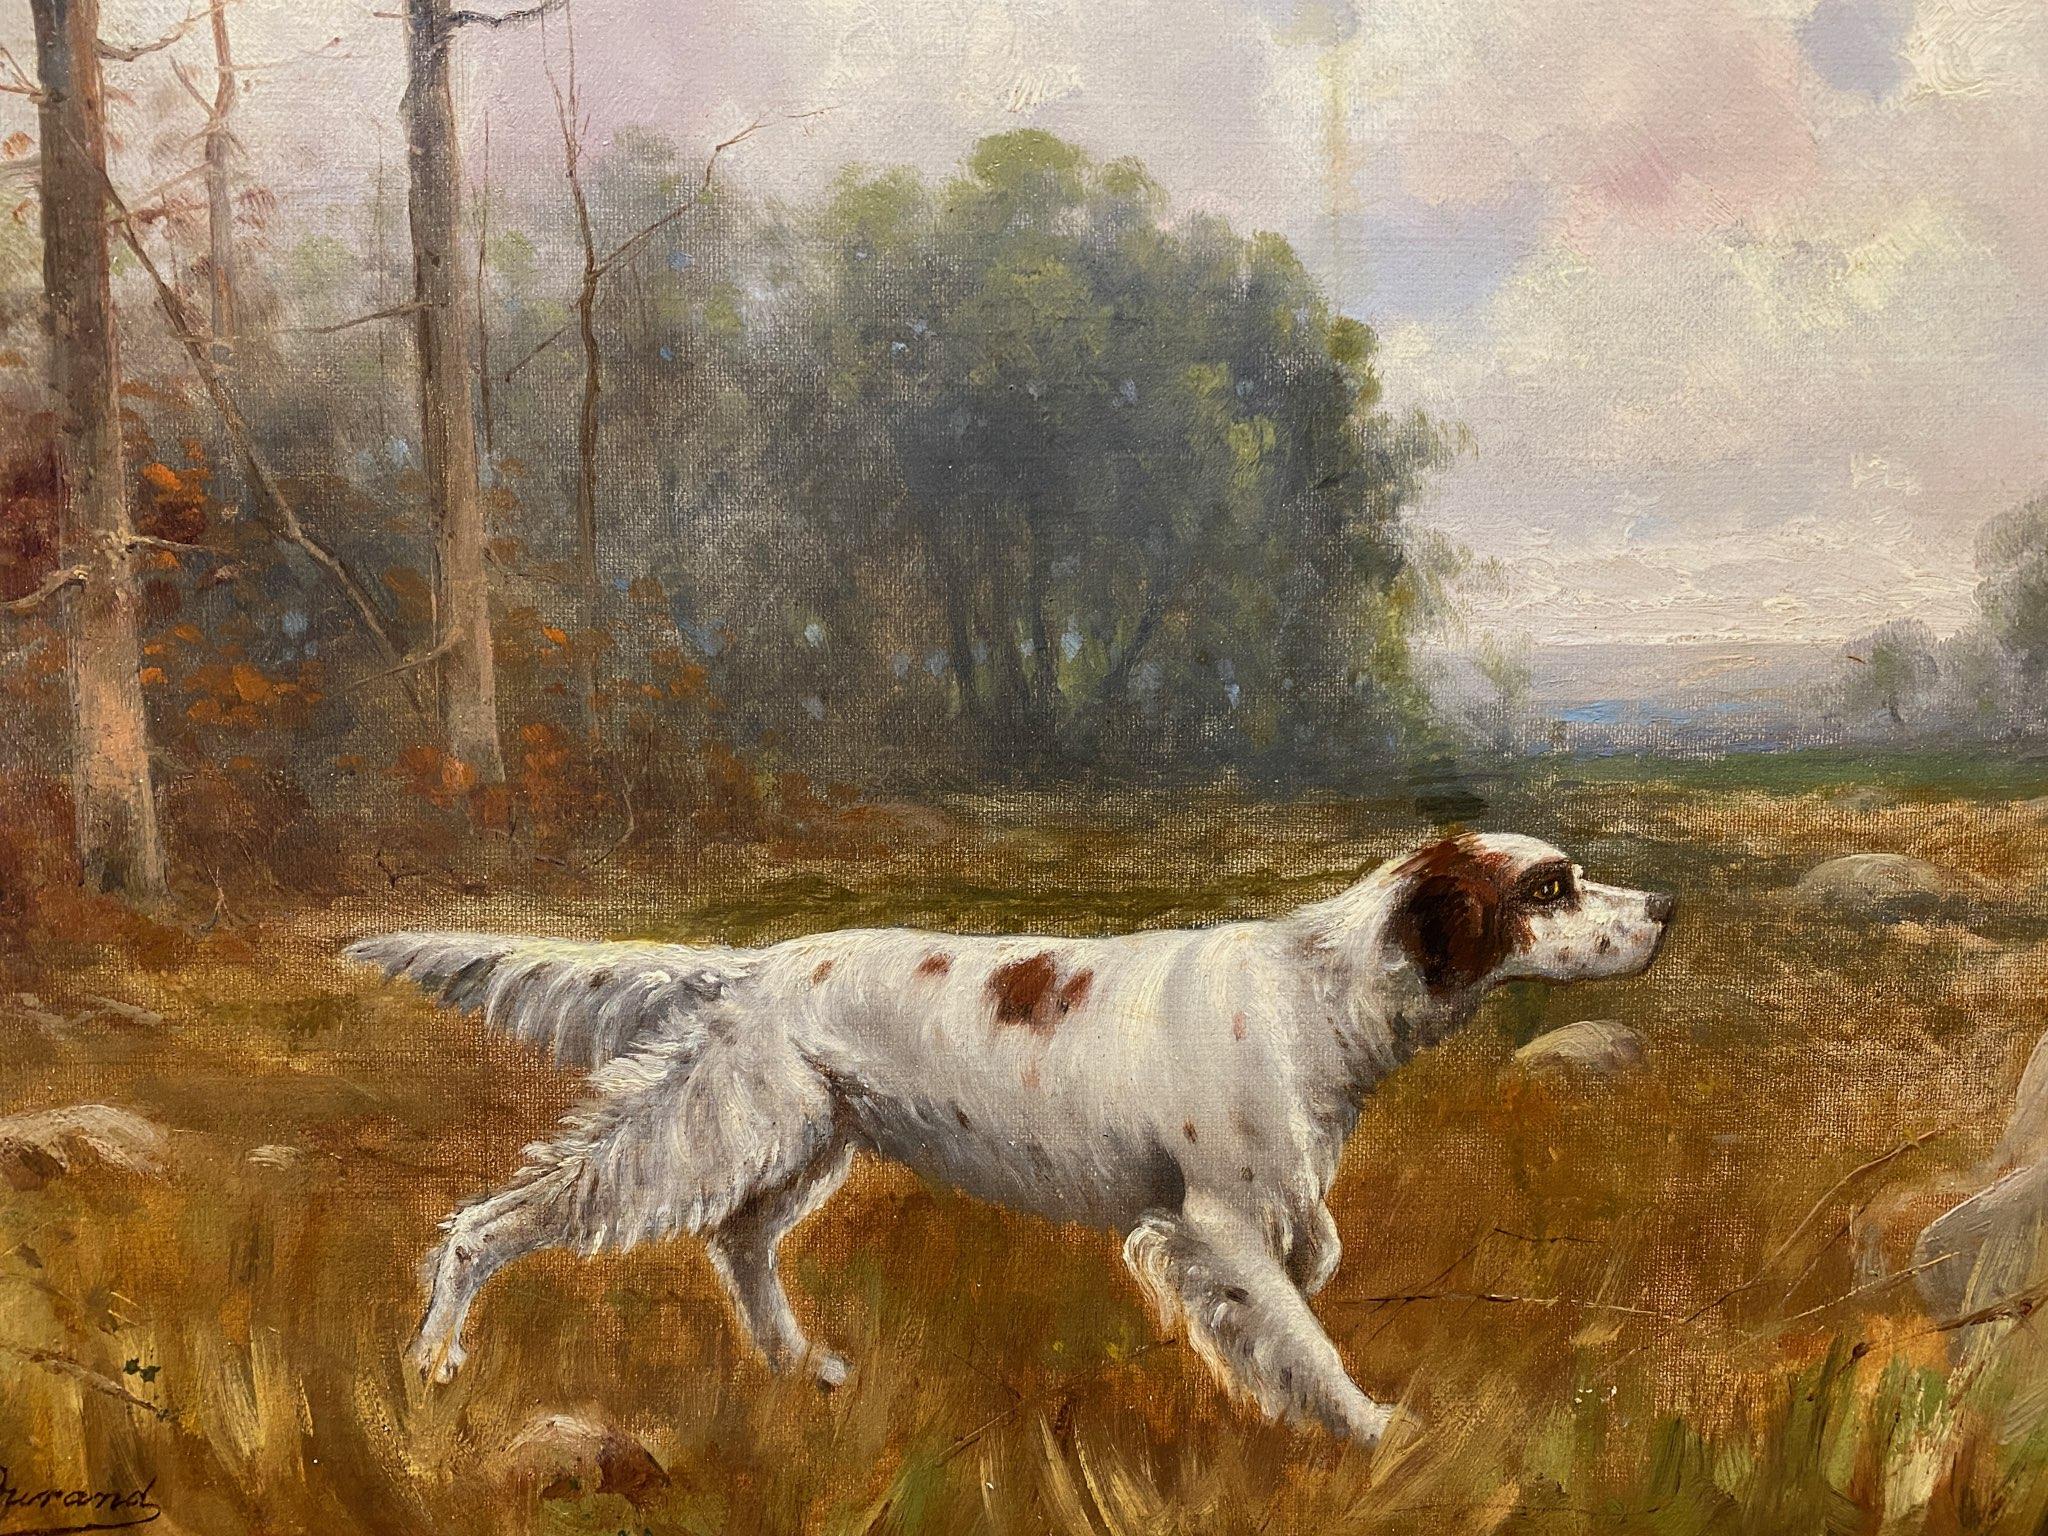 19th century oil on canvas painting of English Setter in an autumn field. In period gilt gesso frame. Signed J.C. Durand who is known for paintings of hunting dogs and landscapes. Signed lower left corner. 
Provenance: The collection of Mark Smith